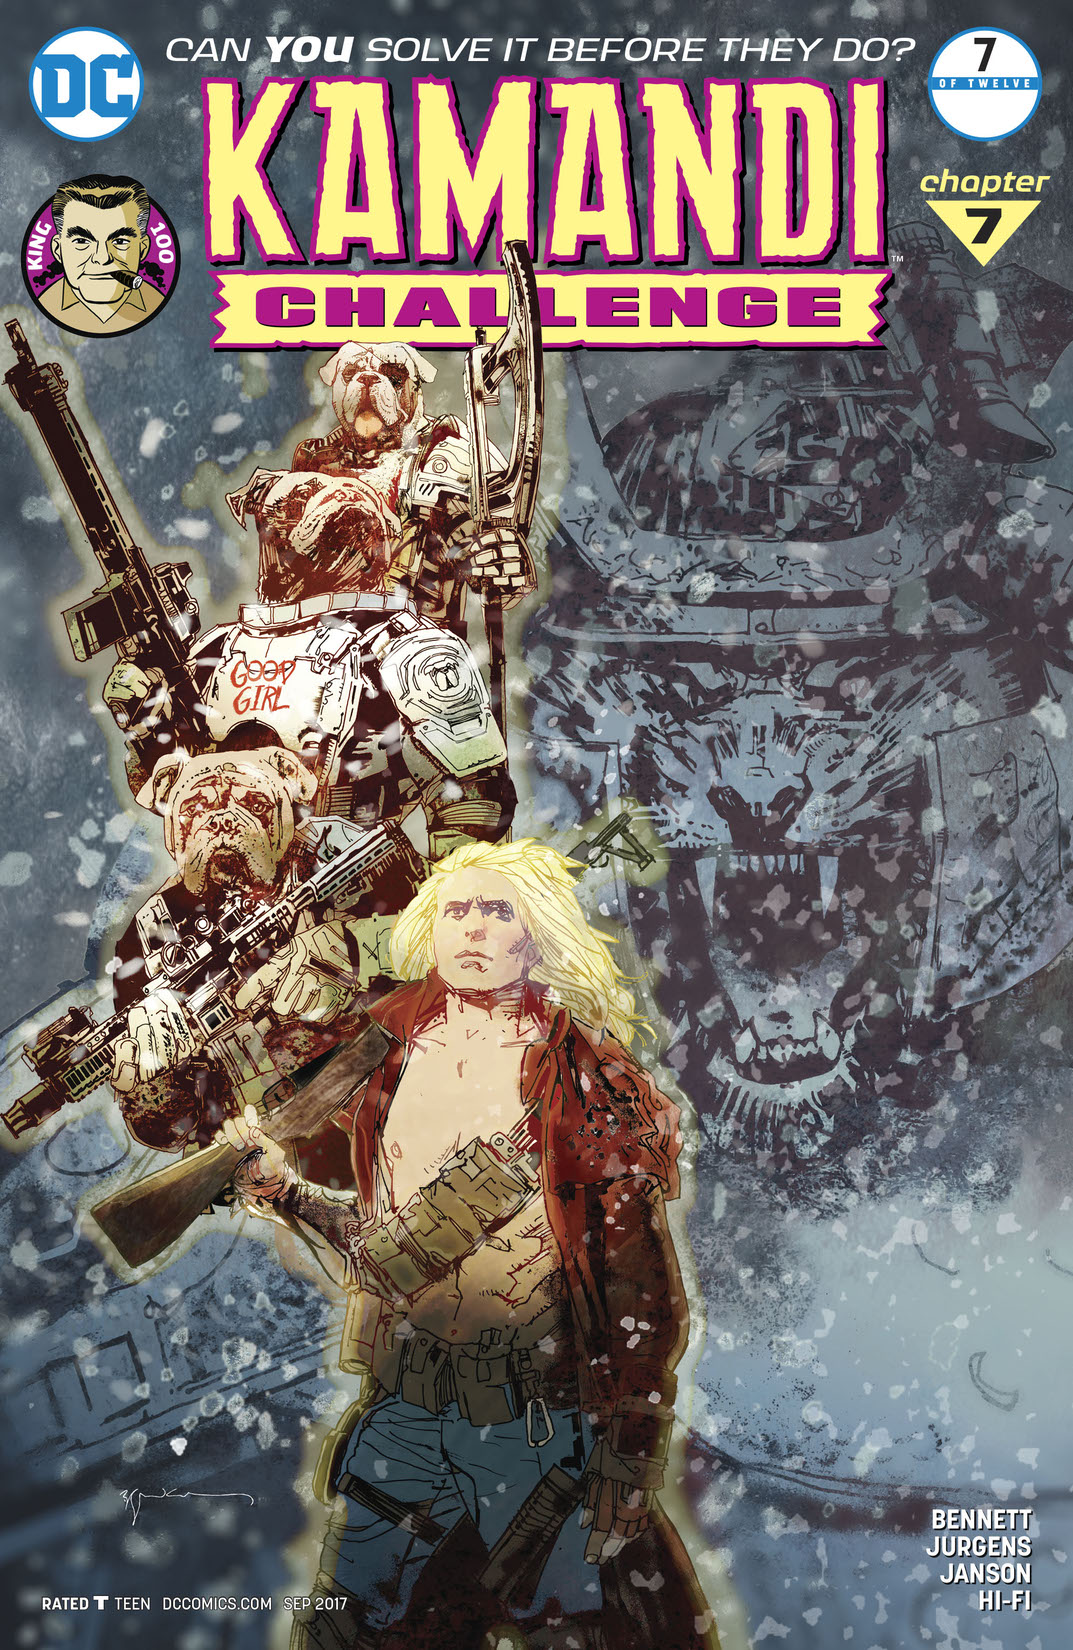 The Kamandi Challenge #7 preview images